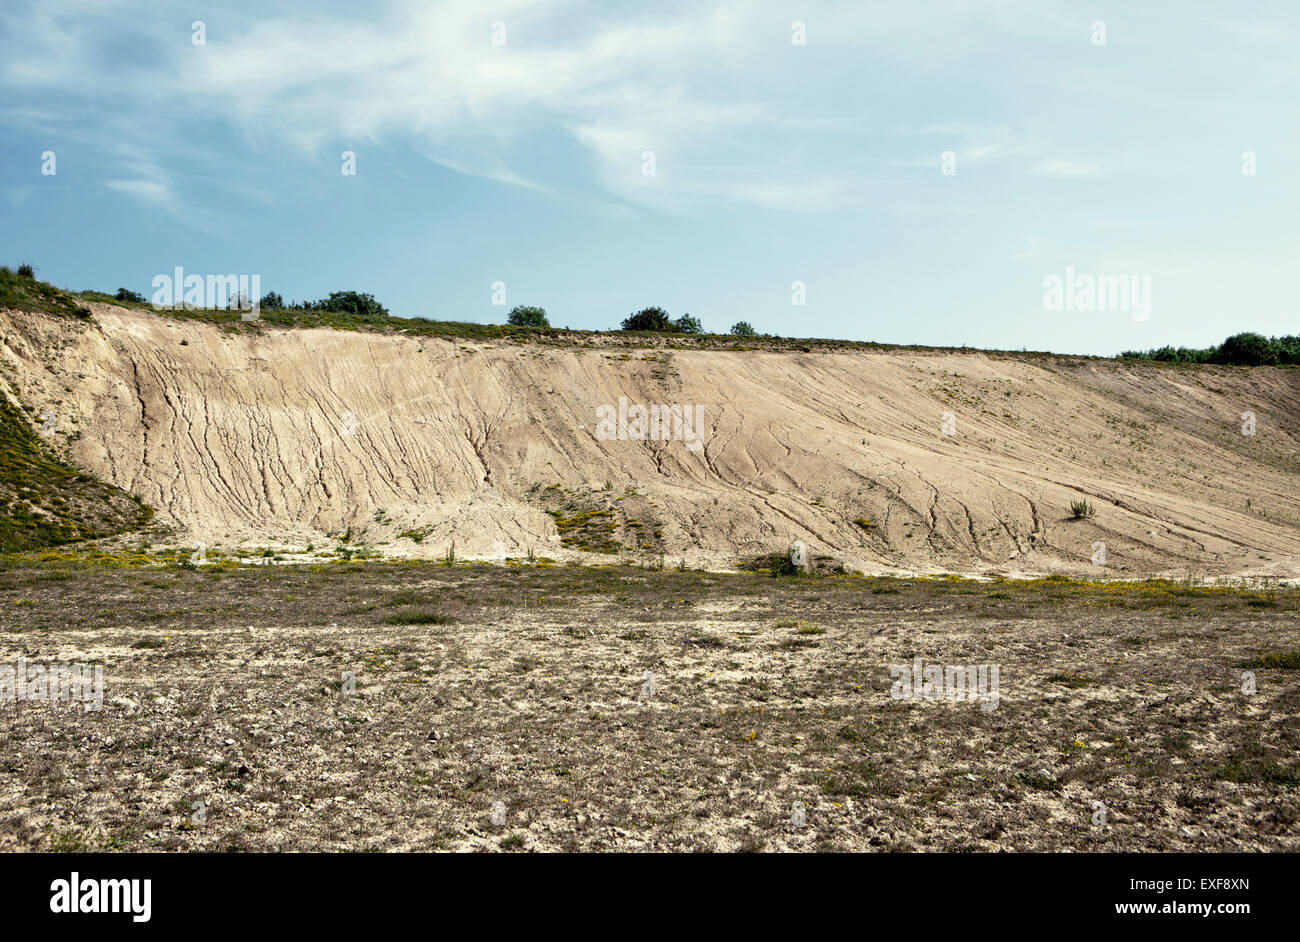 Abandoned quarry with eroded hillside waste Stock Photo